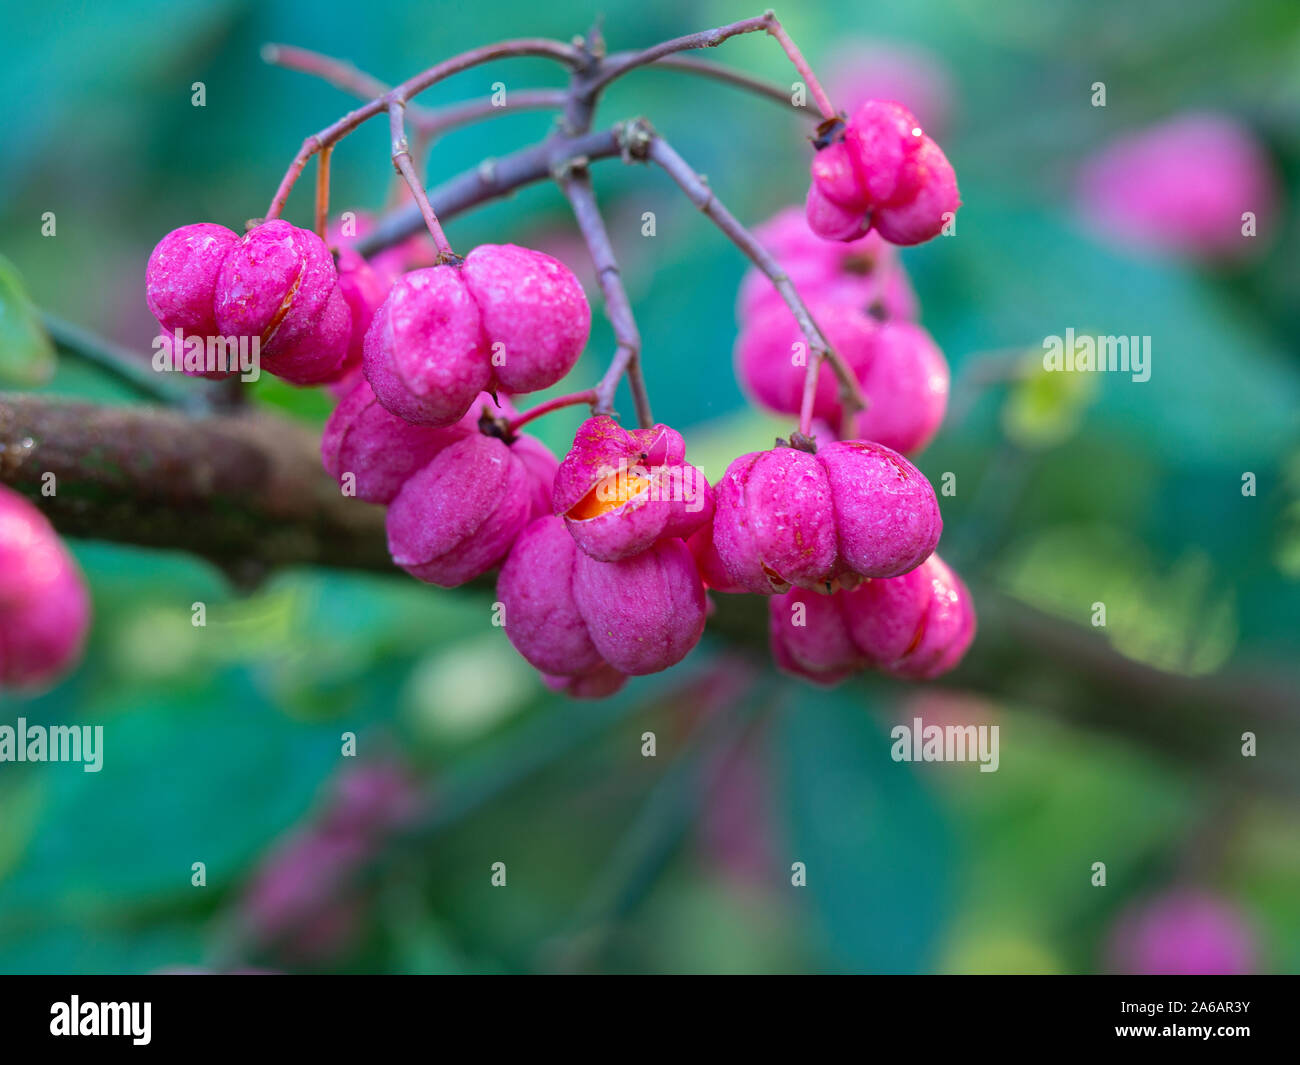 Closeup of beautiful lobed pink berries of the spindle tree (Euonymus europaea) with one of the berries splitting to reveal the orange fruit inside Stock Photo